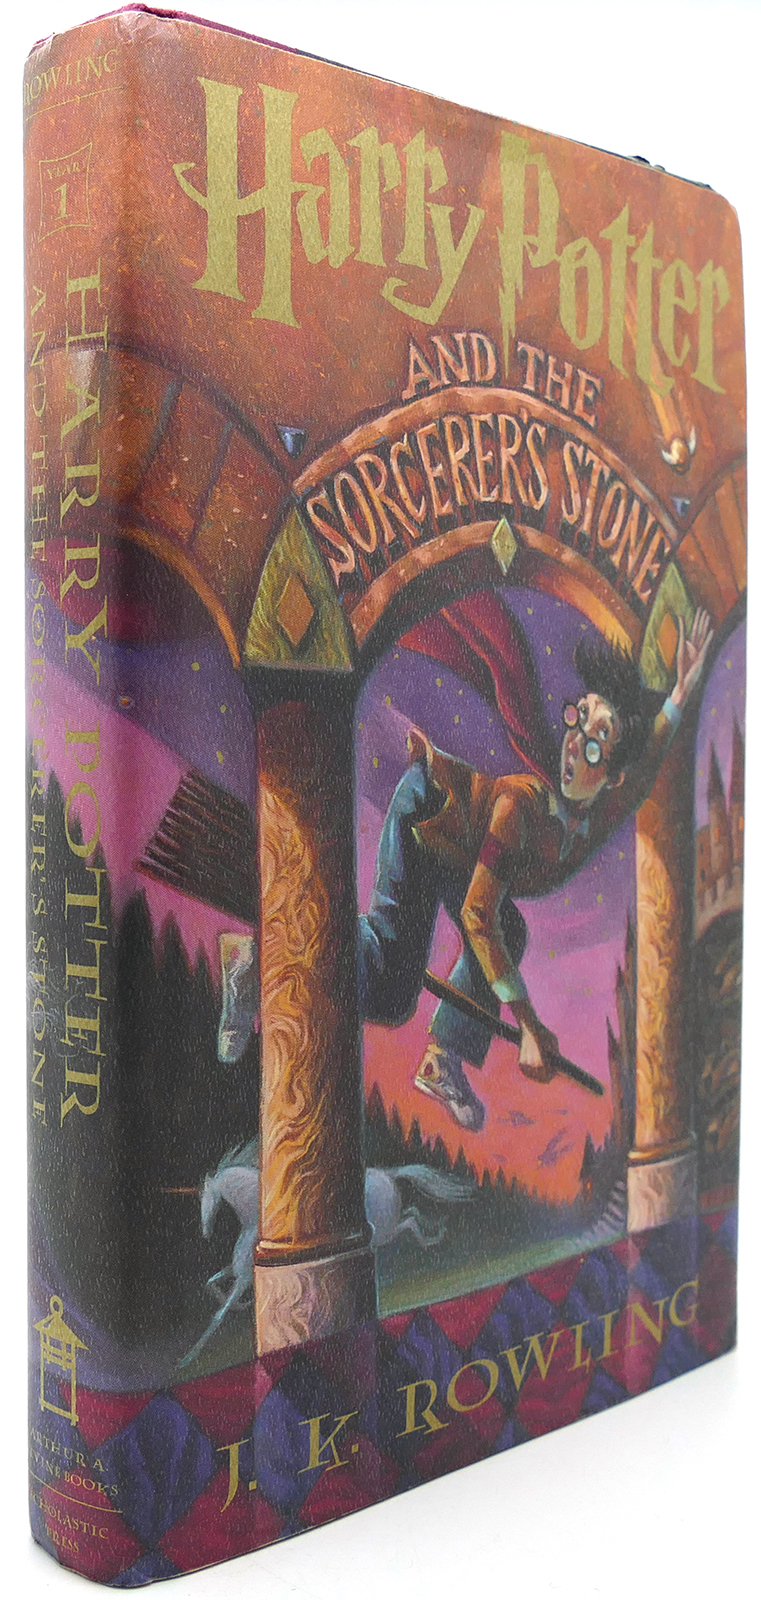 Harry Potter And The Sorcerer's Stone by JK Rowling 